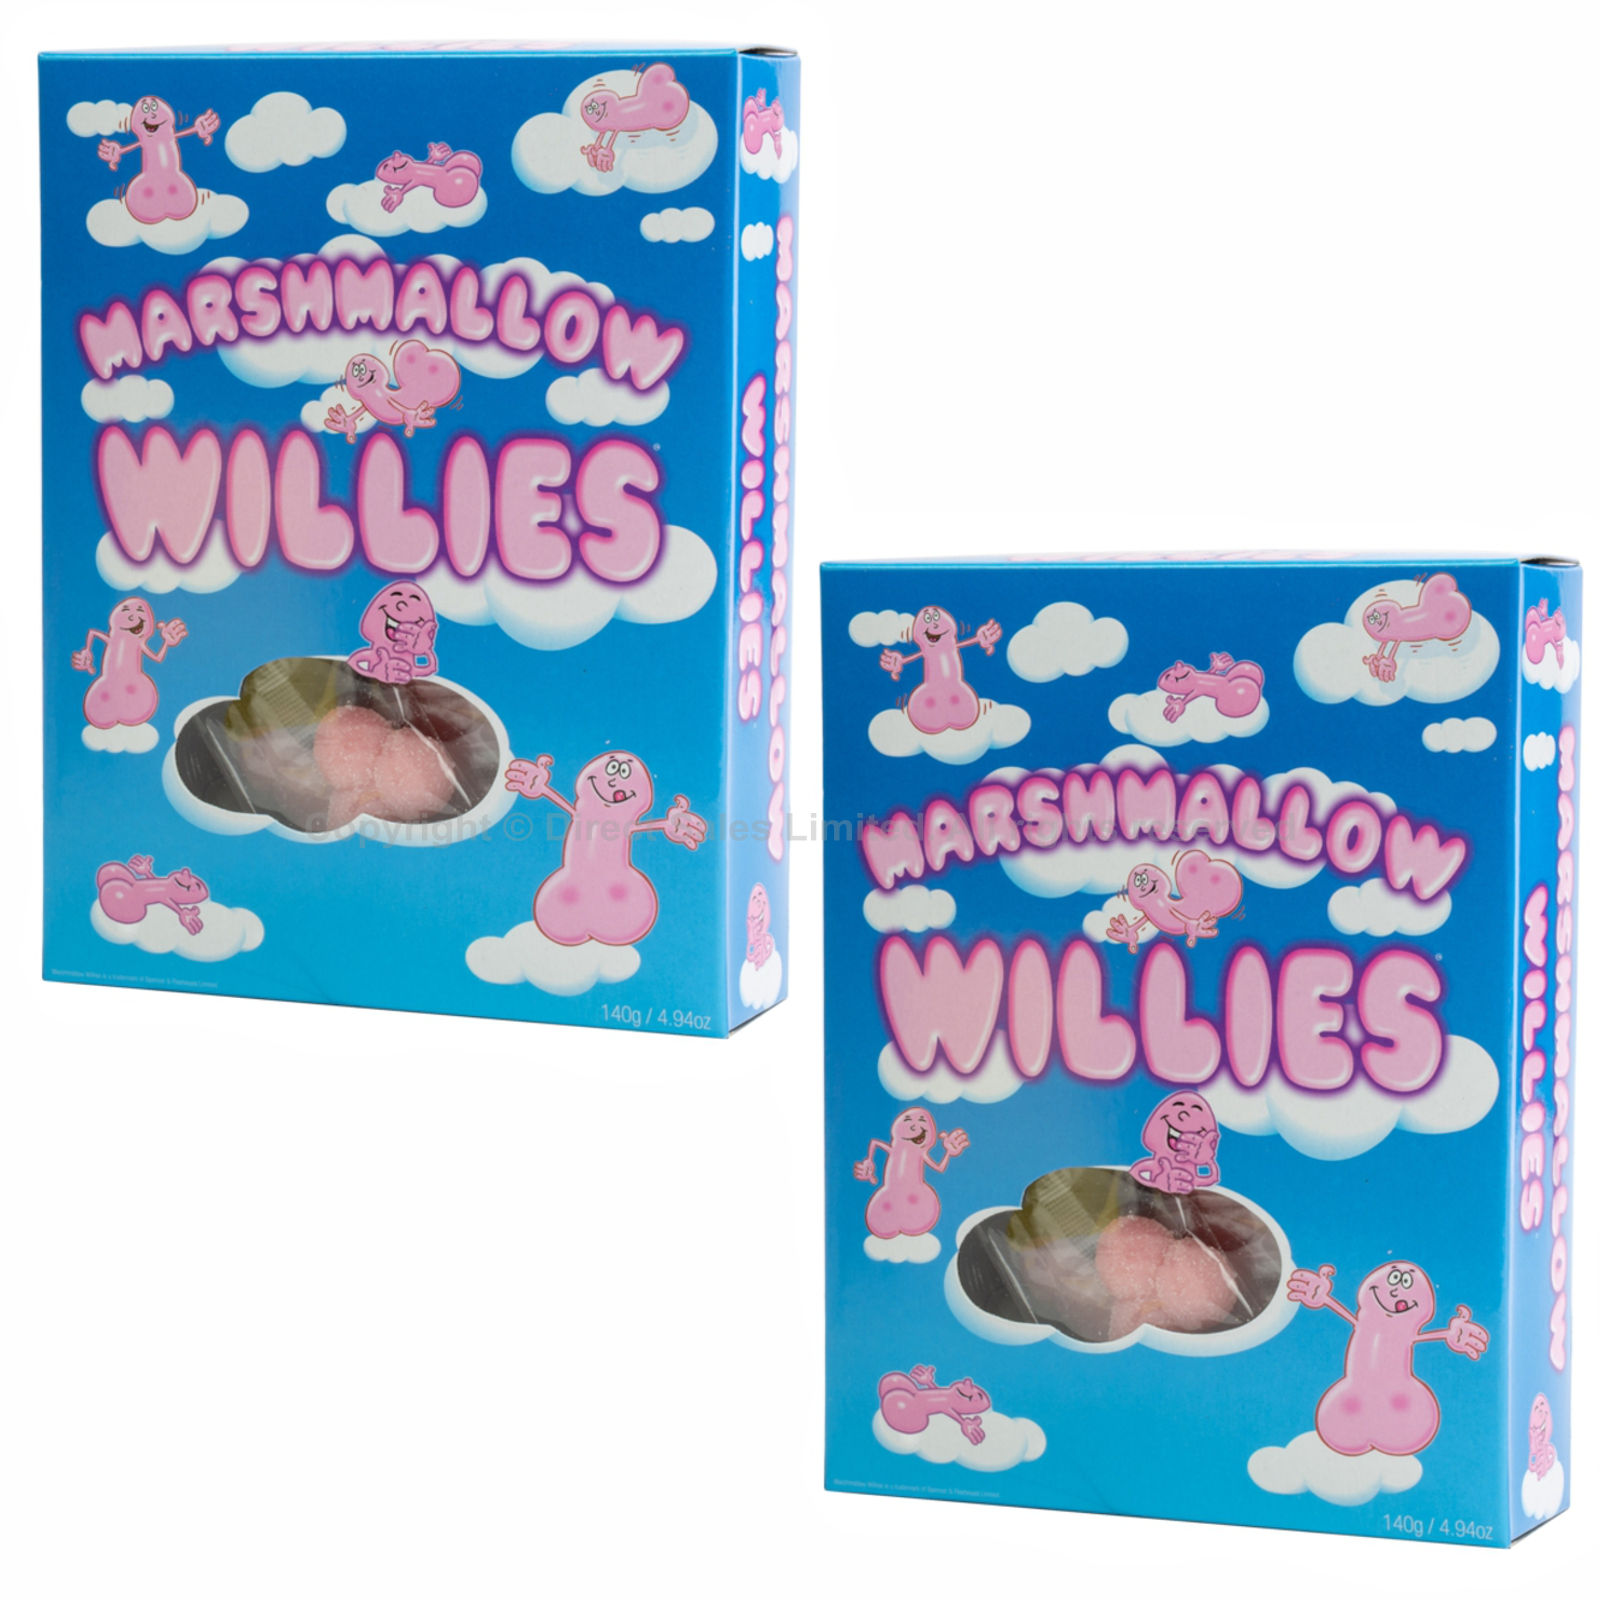 Details about   MARSHMALLOW WILLIES Jelly Willy Sweets Adult Candy Penis Shaped Fun Gift 